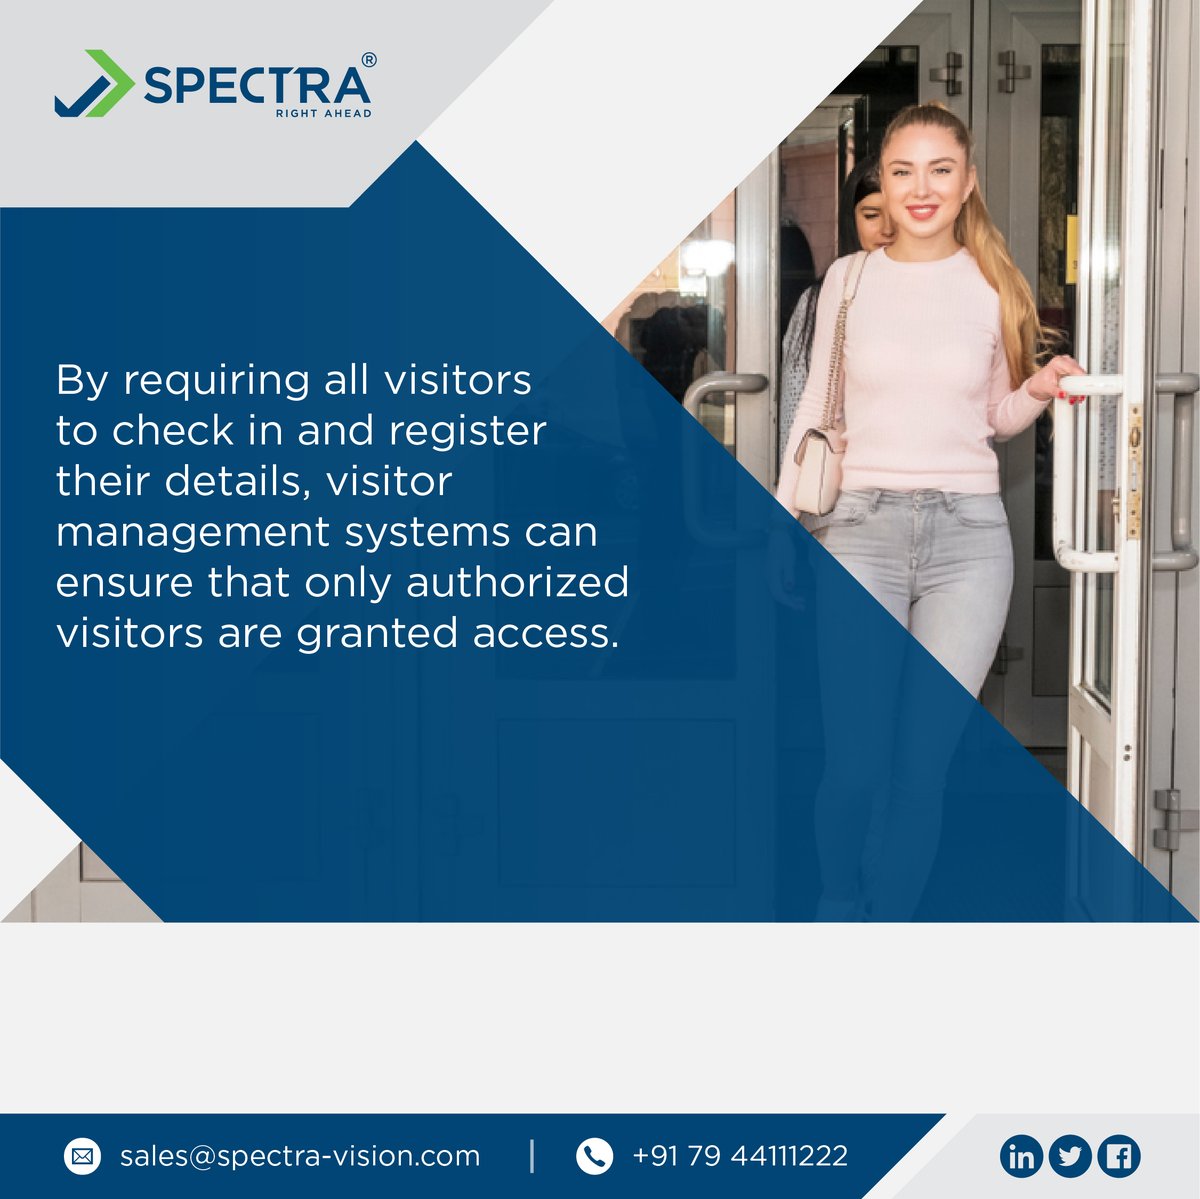 Don't let security be a pain in your neck!

A visitor management system can help you protect your workplace while keeping visitors happy 😊

#WorkplaceSecurity #HappyVisitors #VisitorManagementSystem